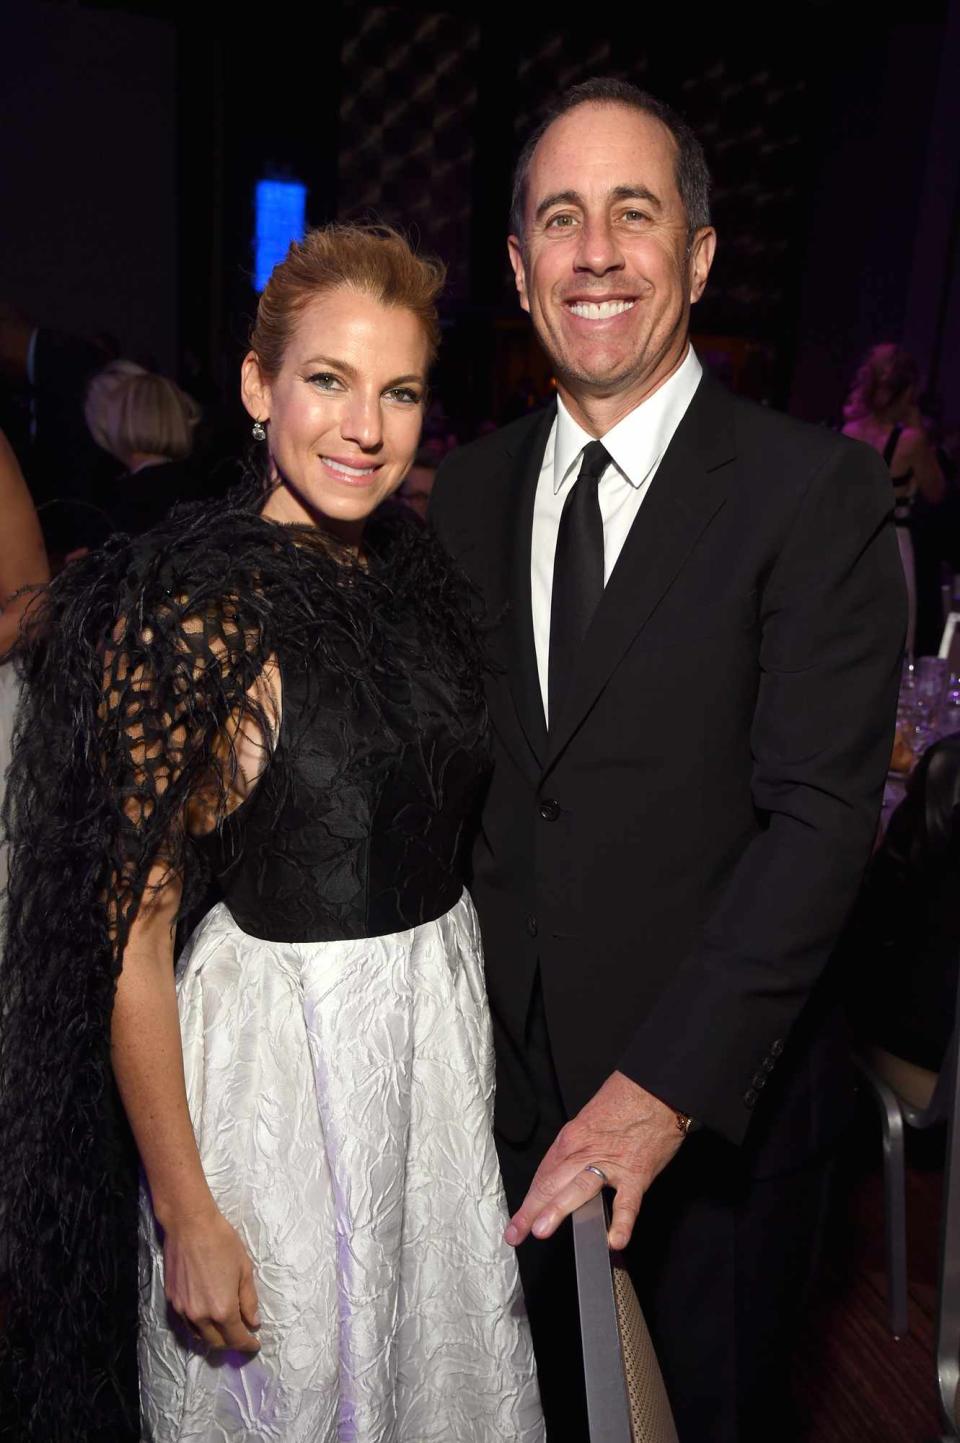 Michael Kovac/Getty Images Jerry and Jessica Seinfeld posing